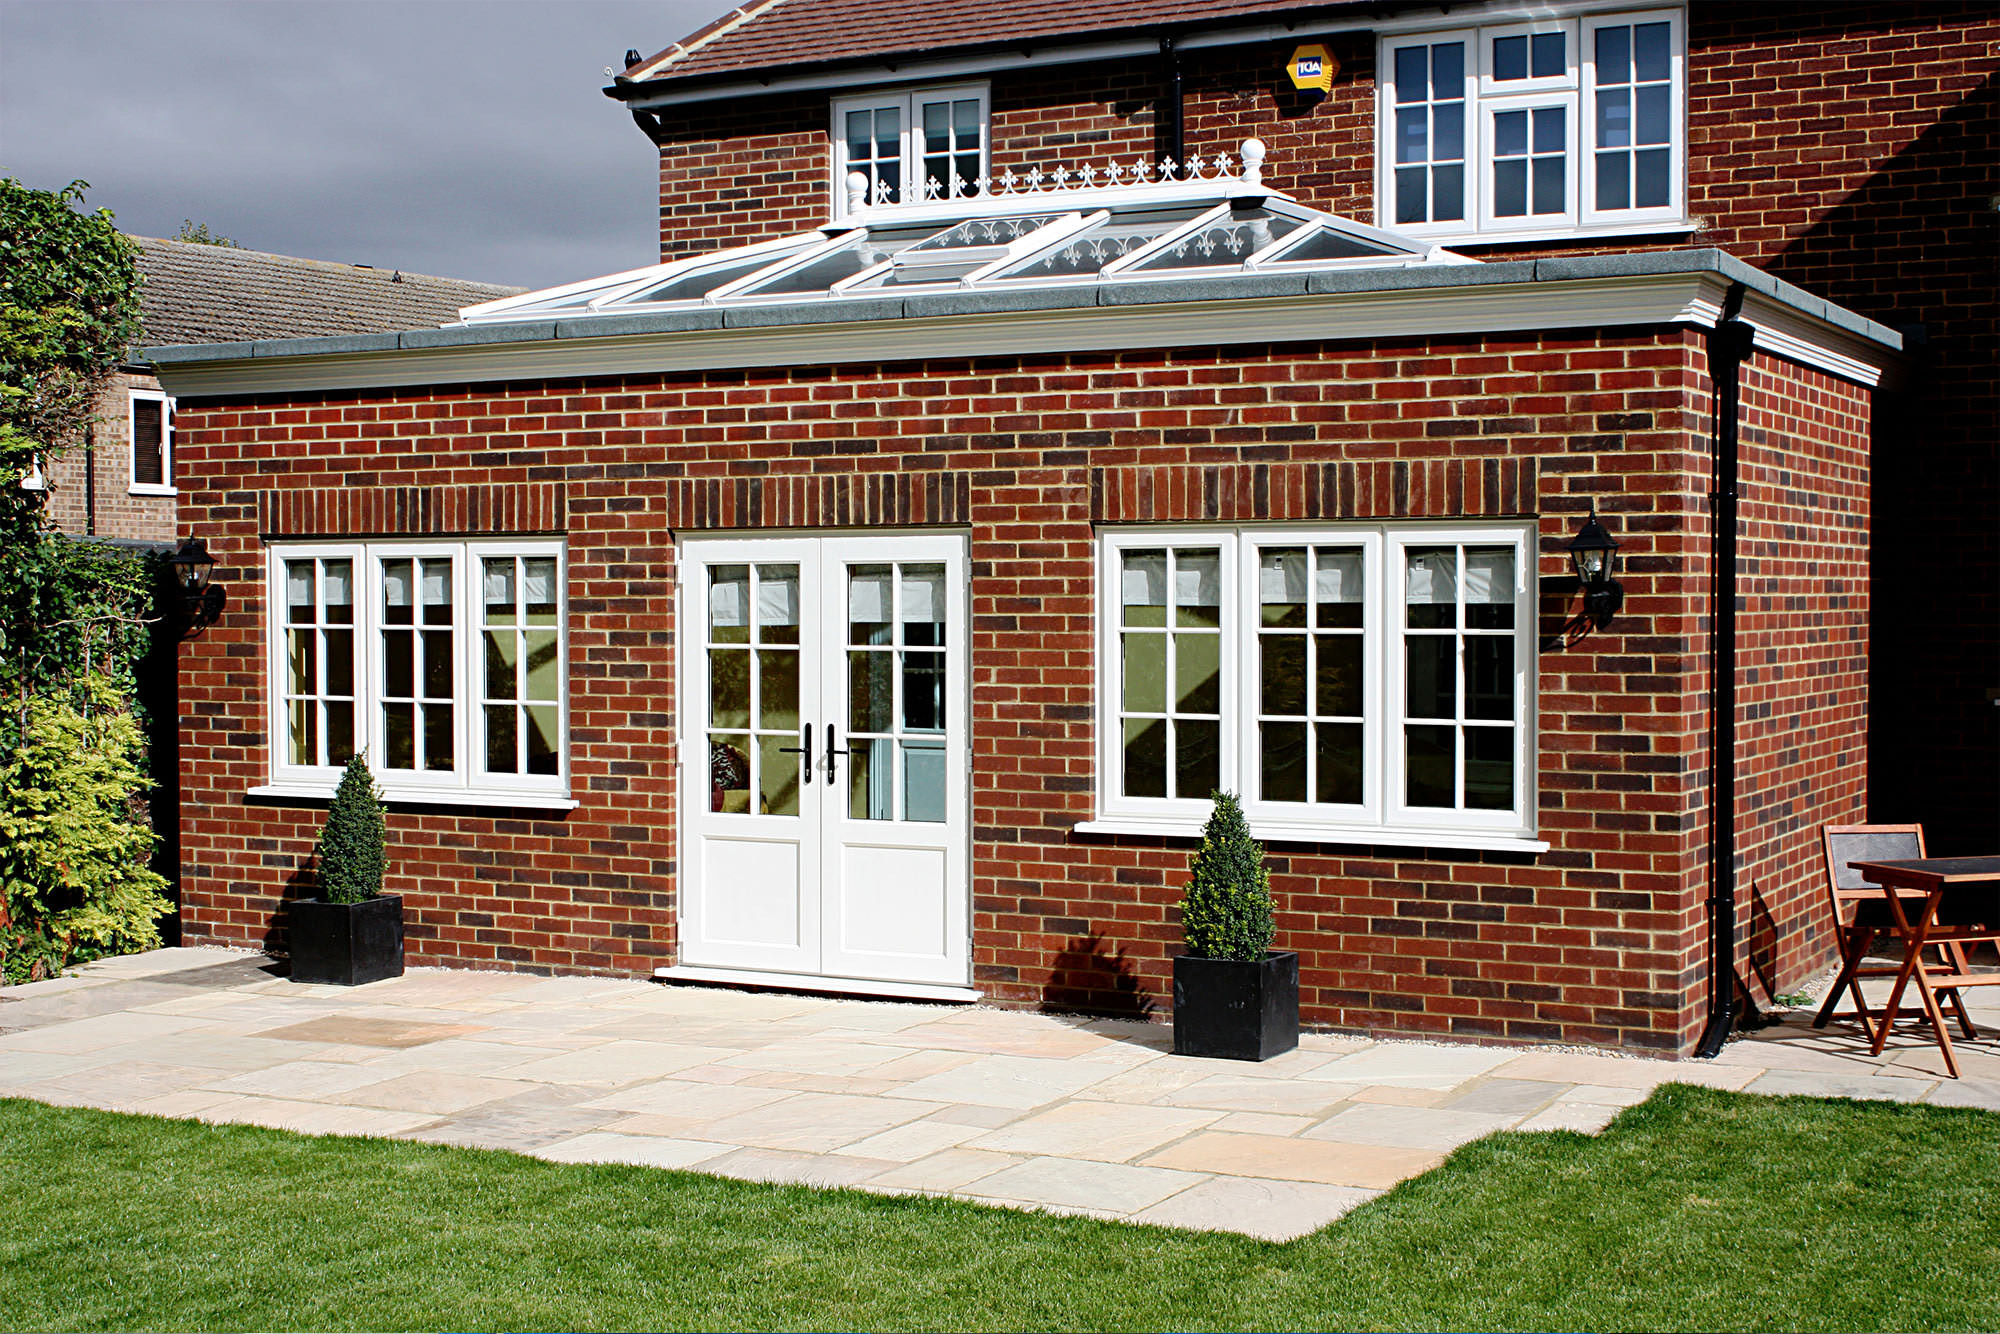 Conservatory or Orangery?